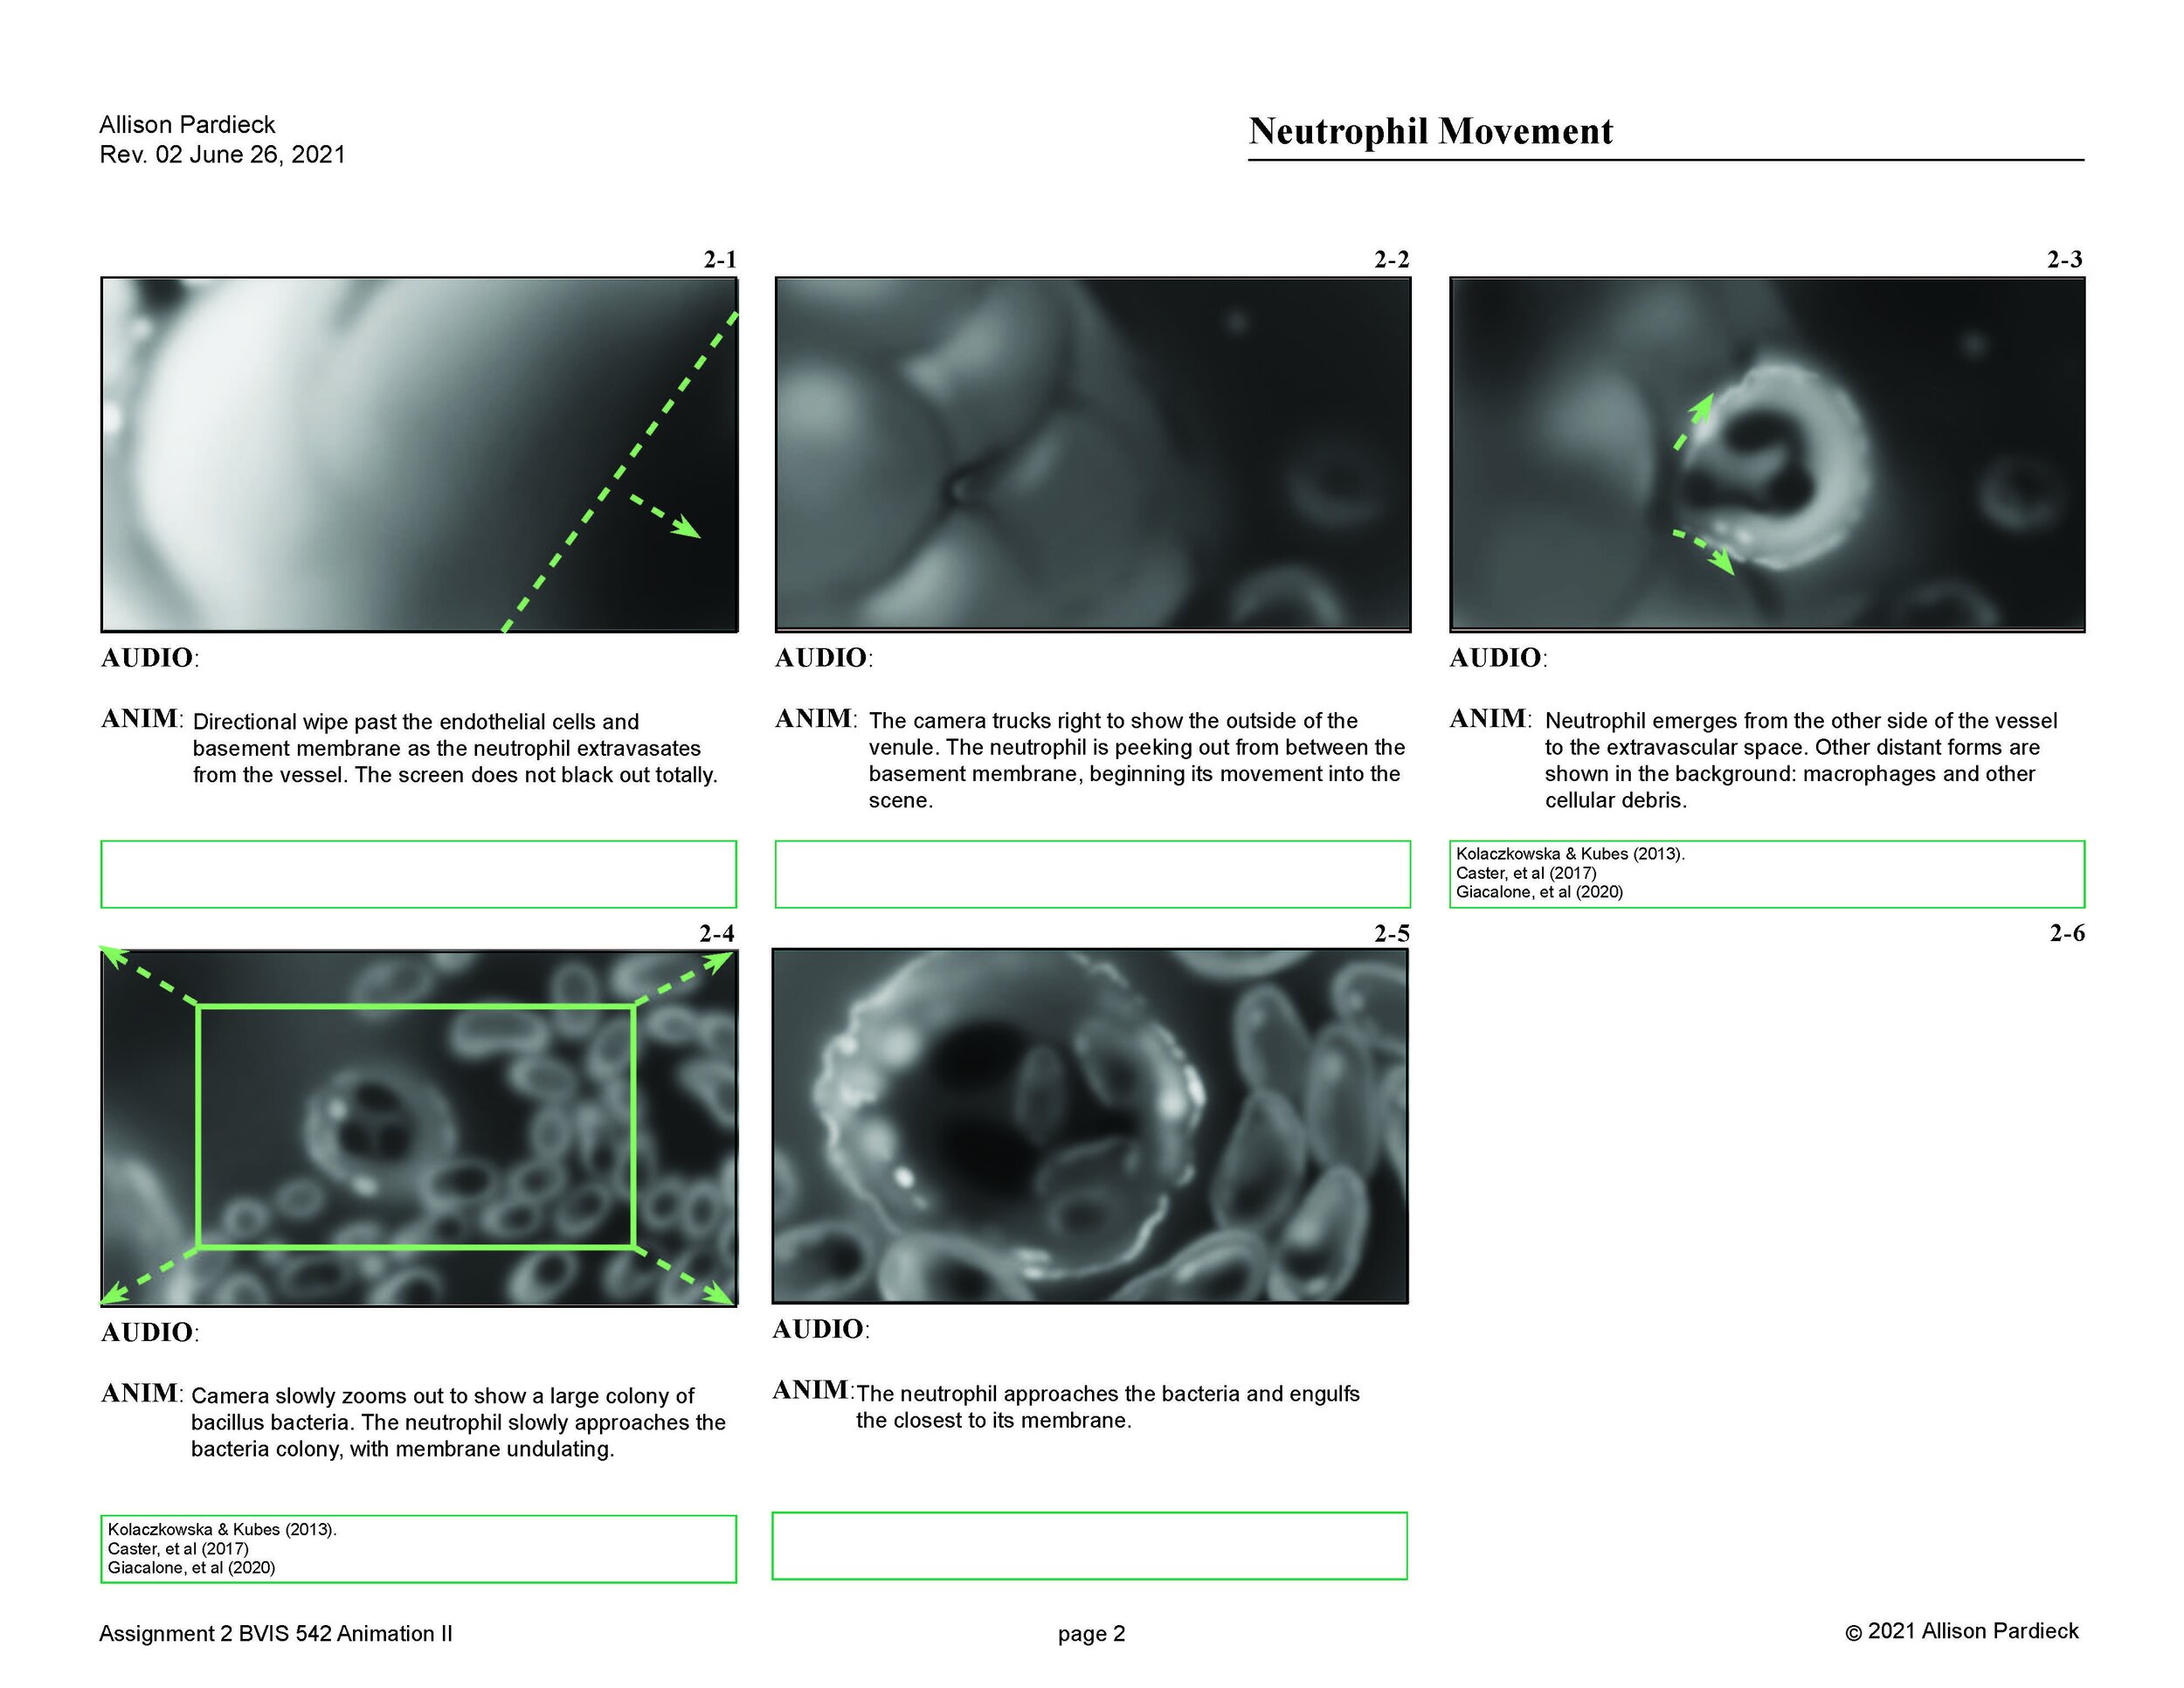 "Neutrophil Movement" Storyboard (page 2)